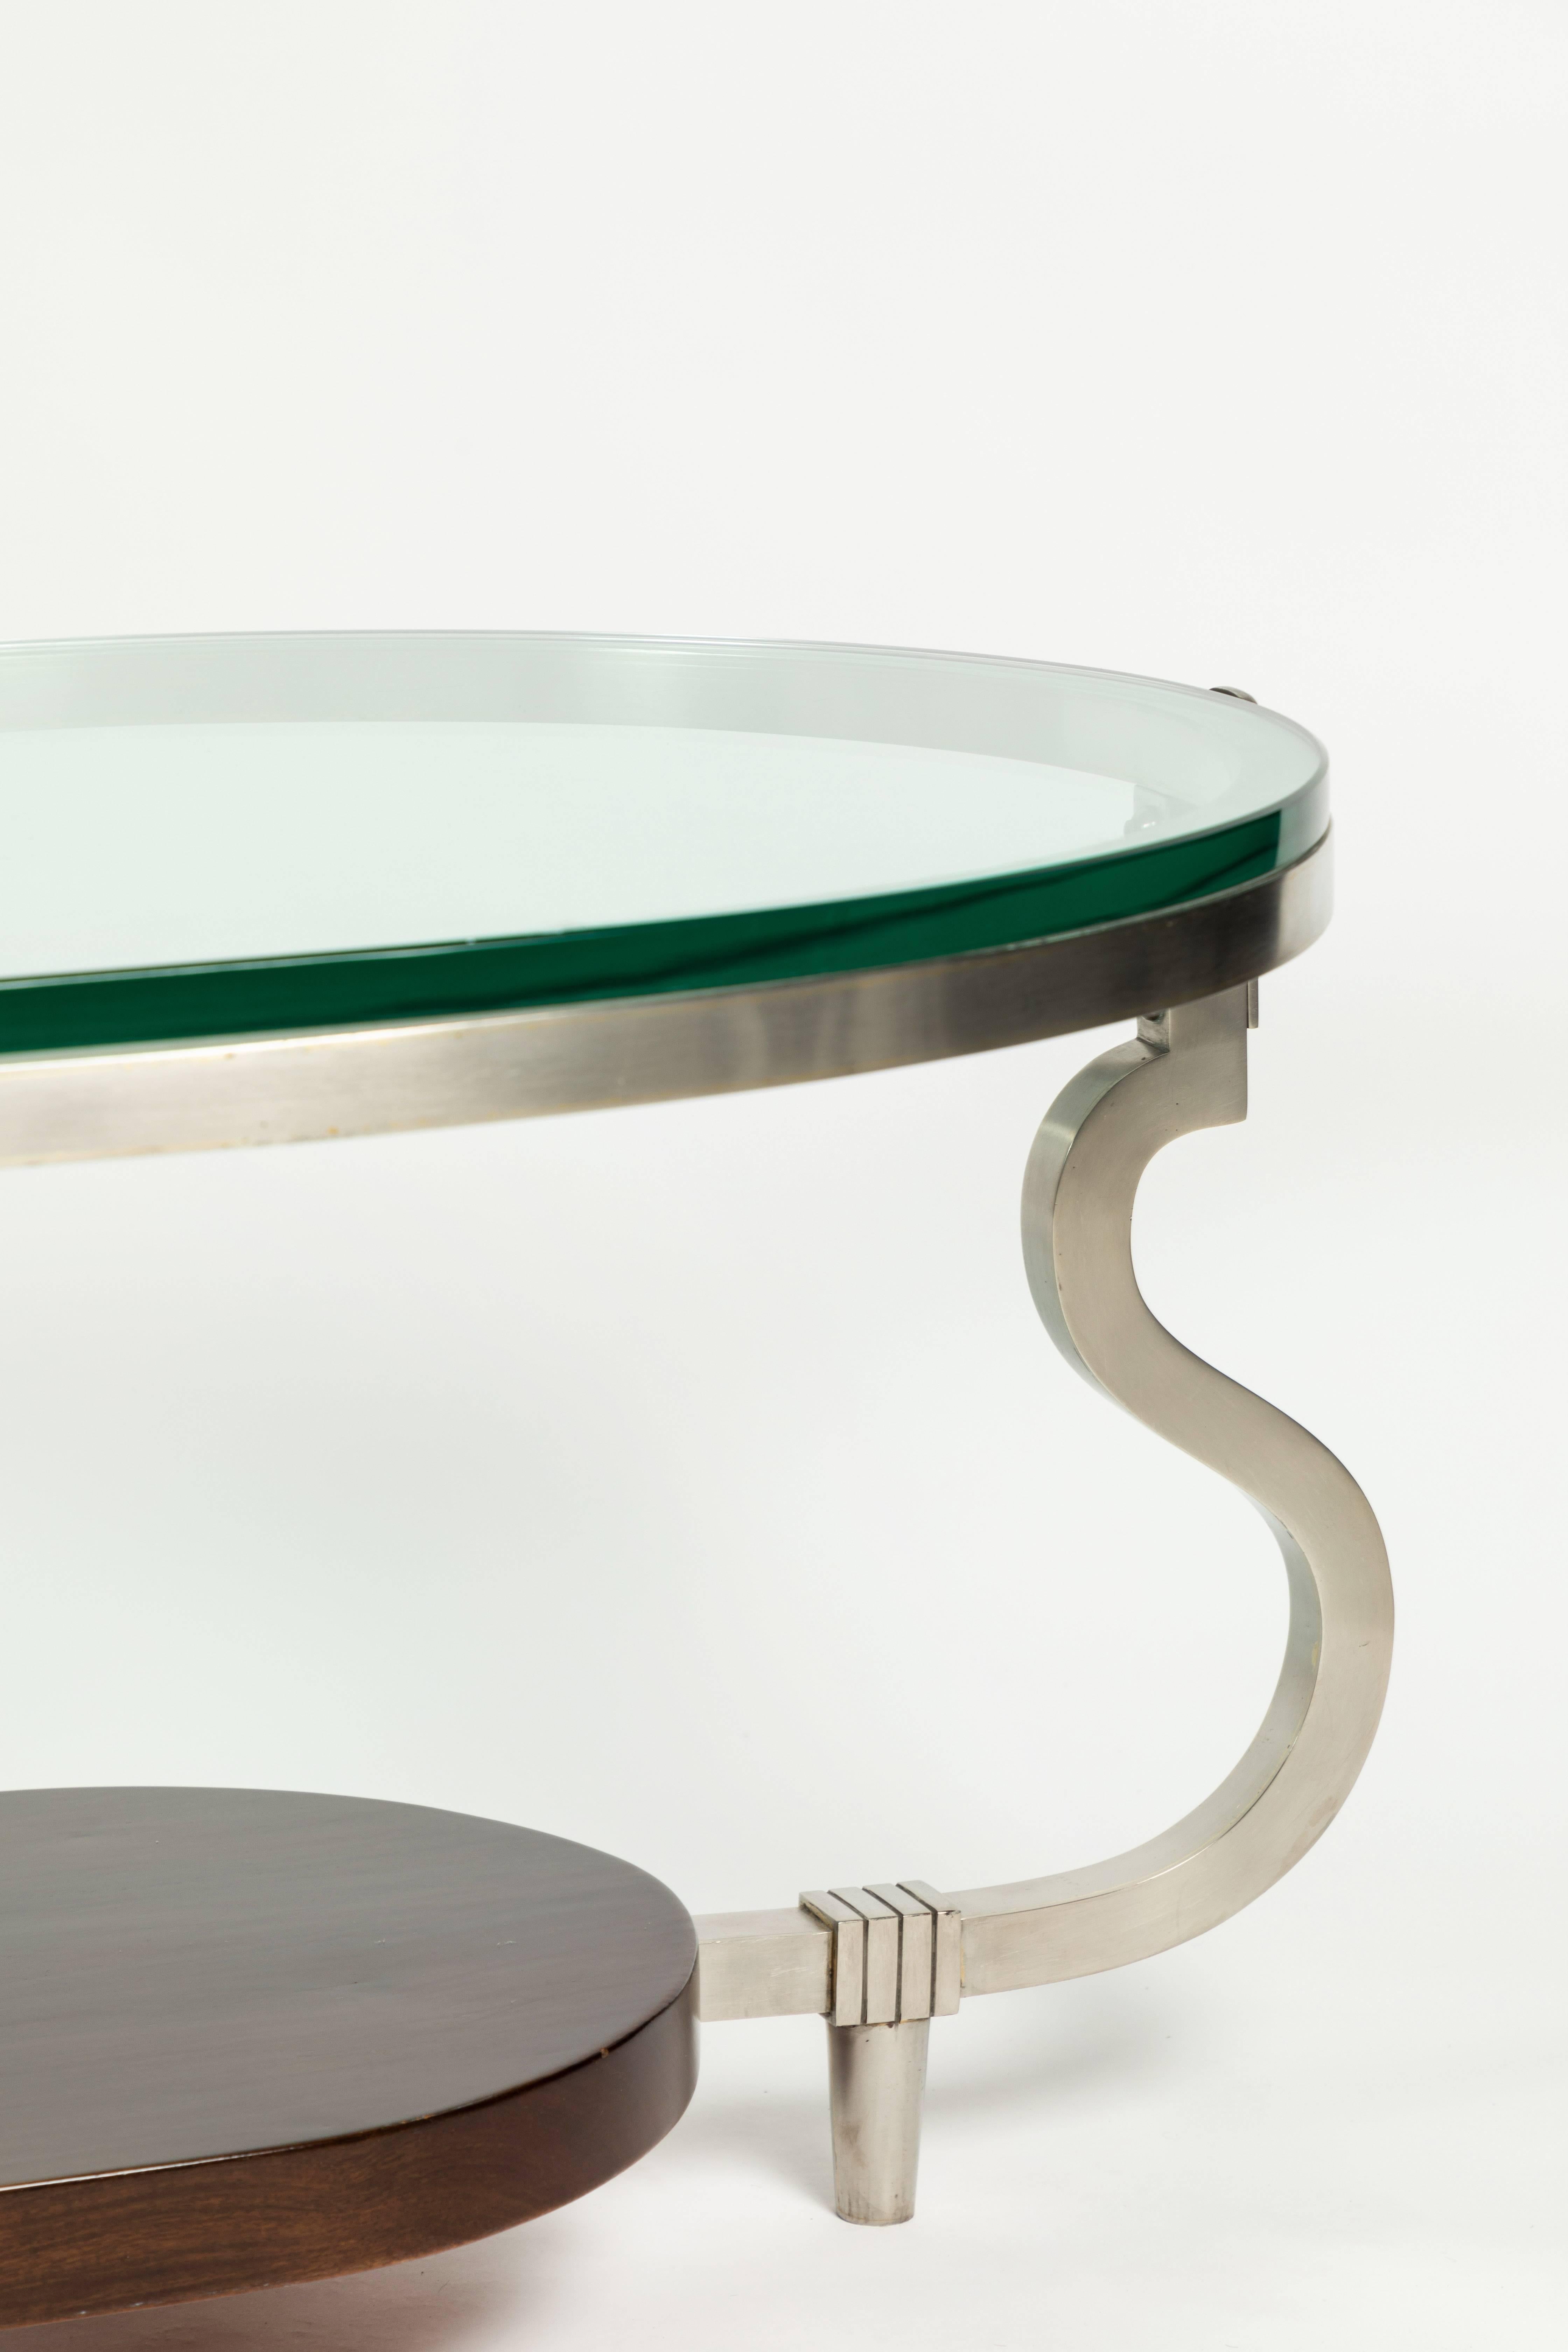 American Two-Tiered Custom Cocktail Table by Tommi Parzinger for Parzinger Originals